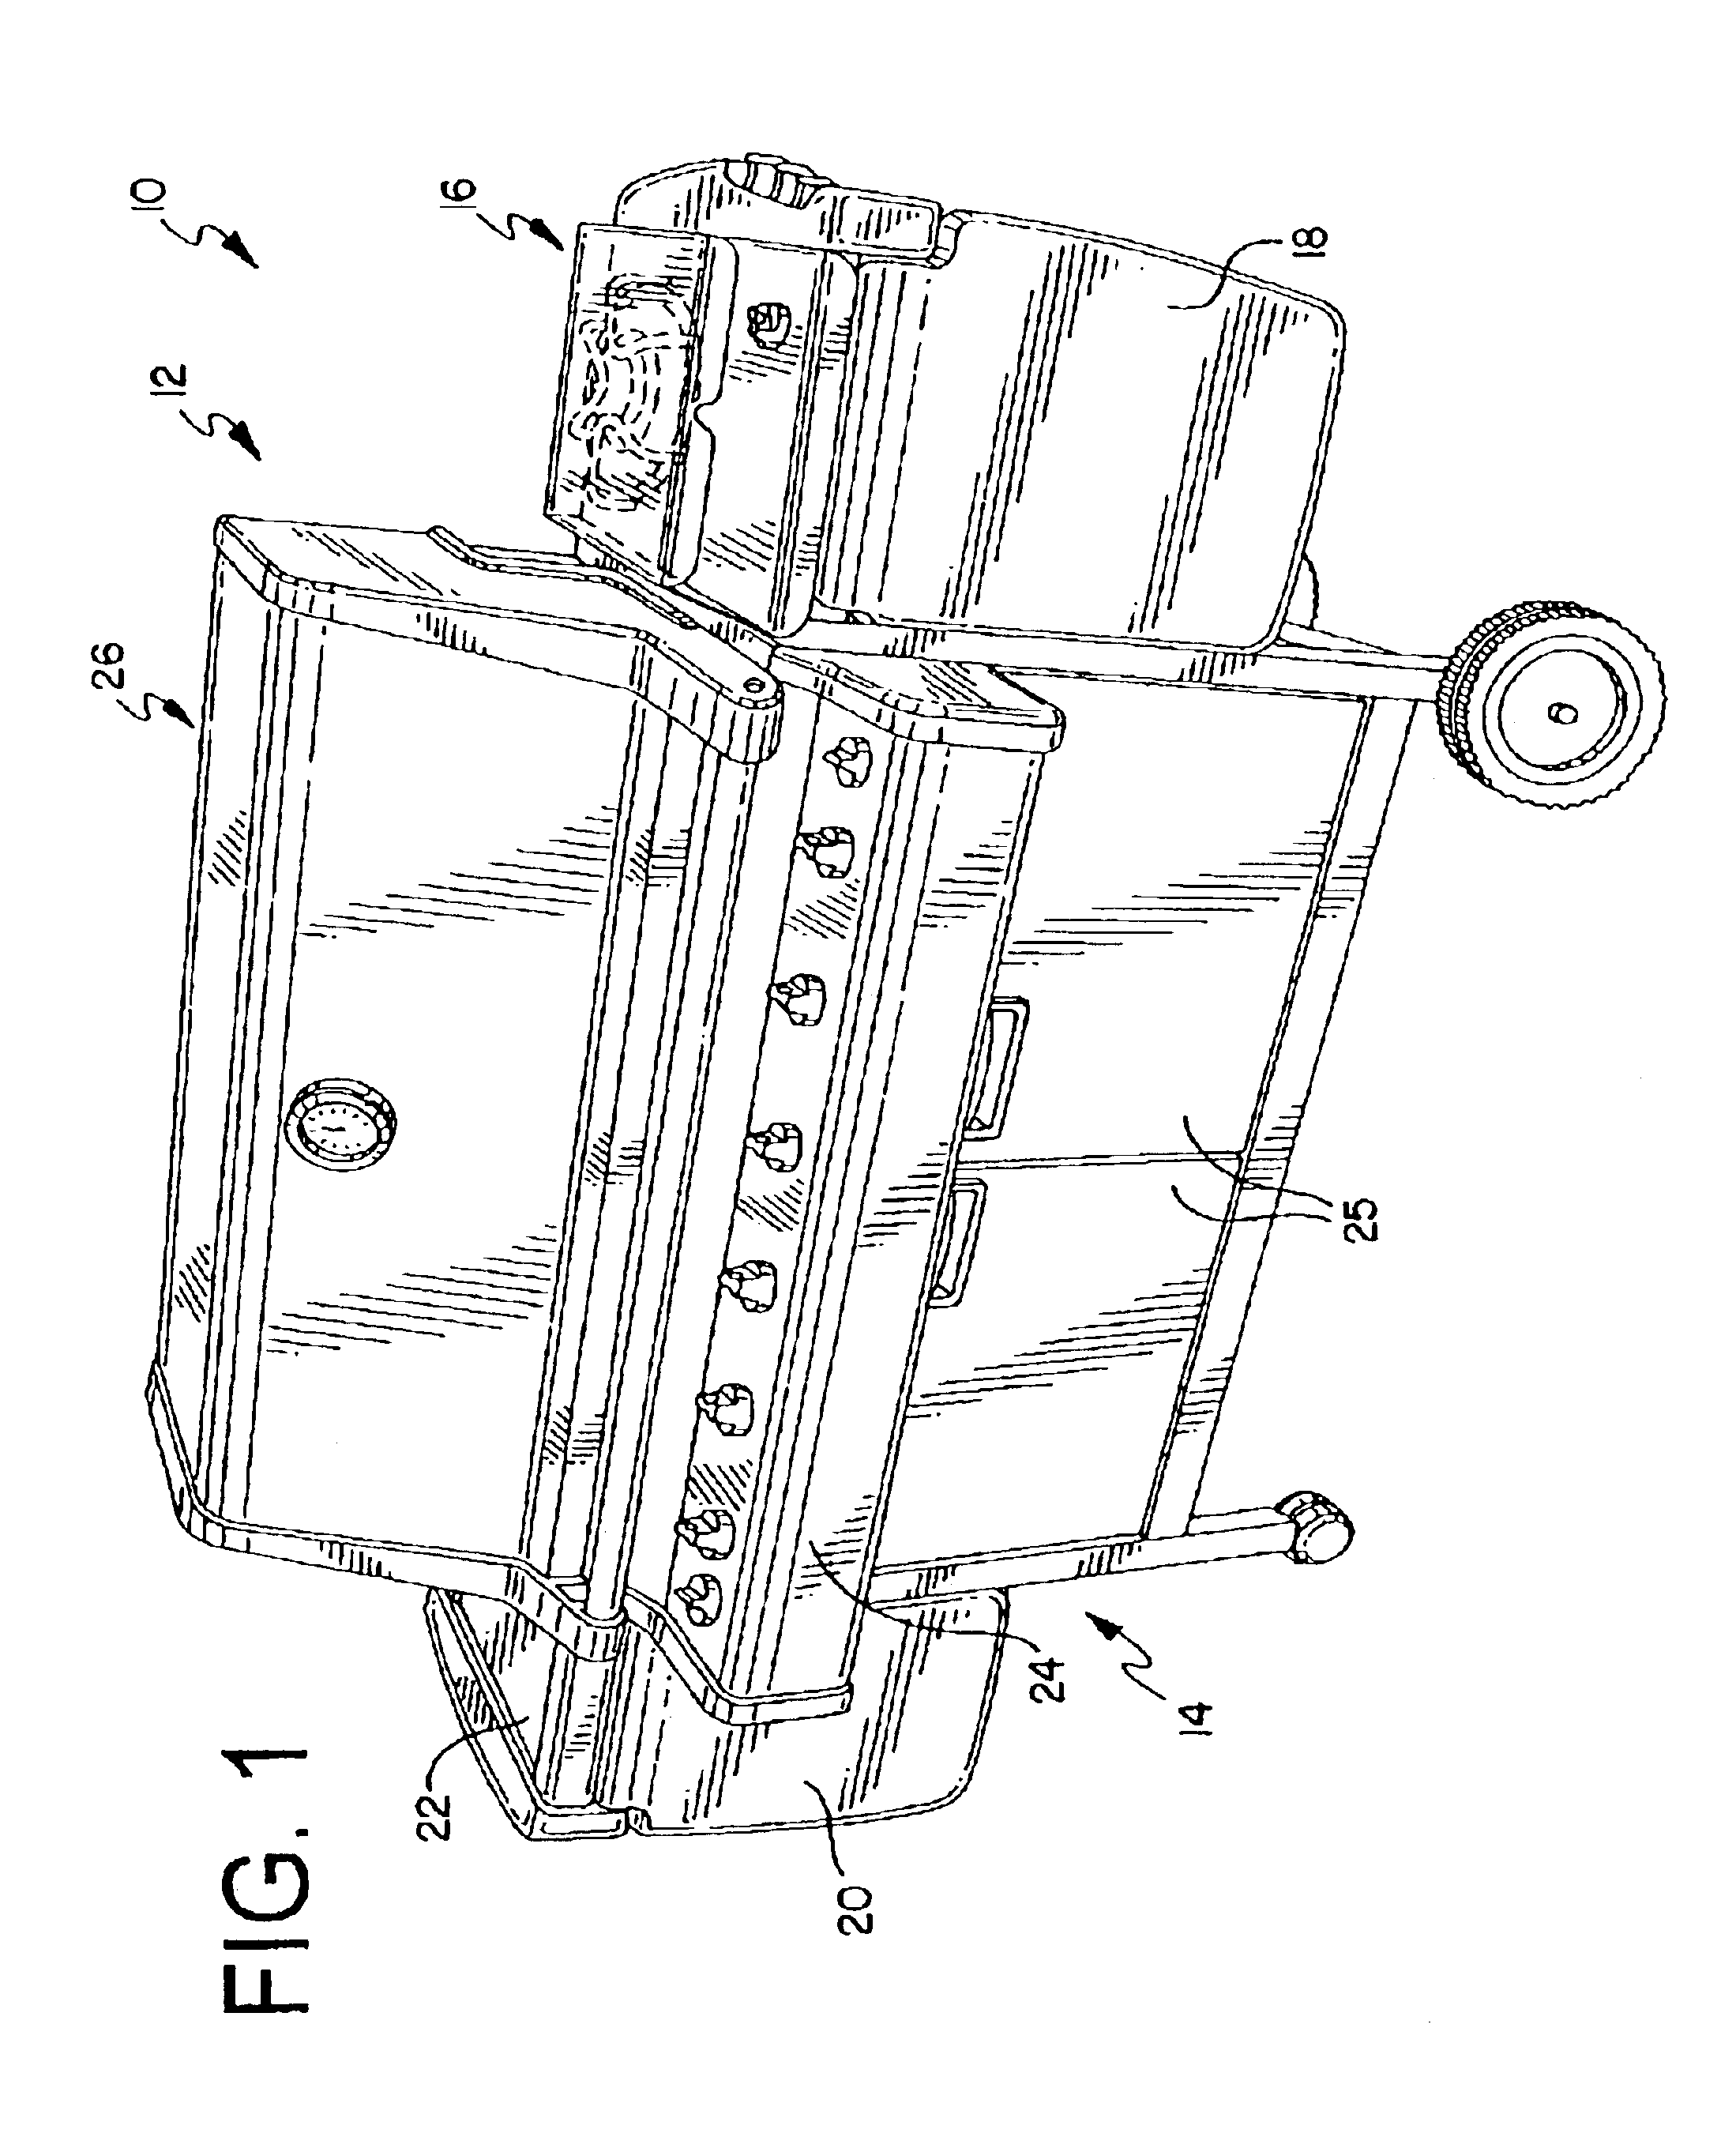 Barbecue grill assembly